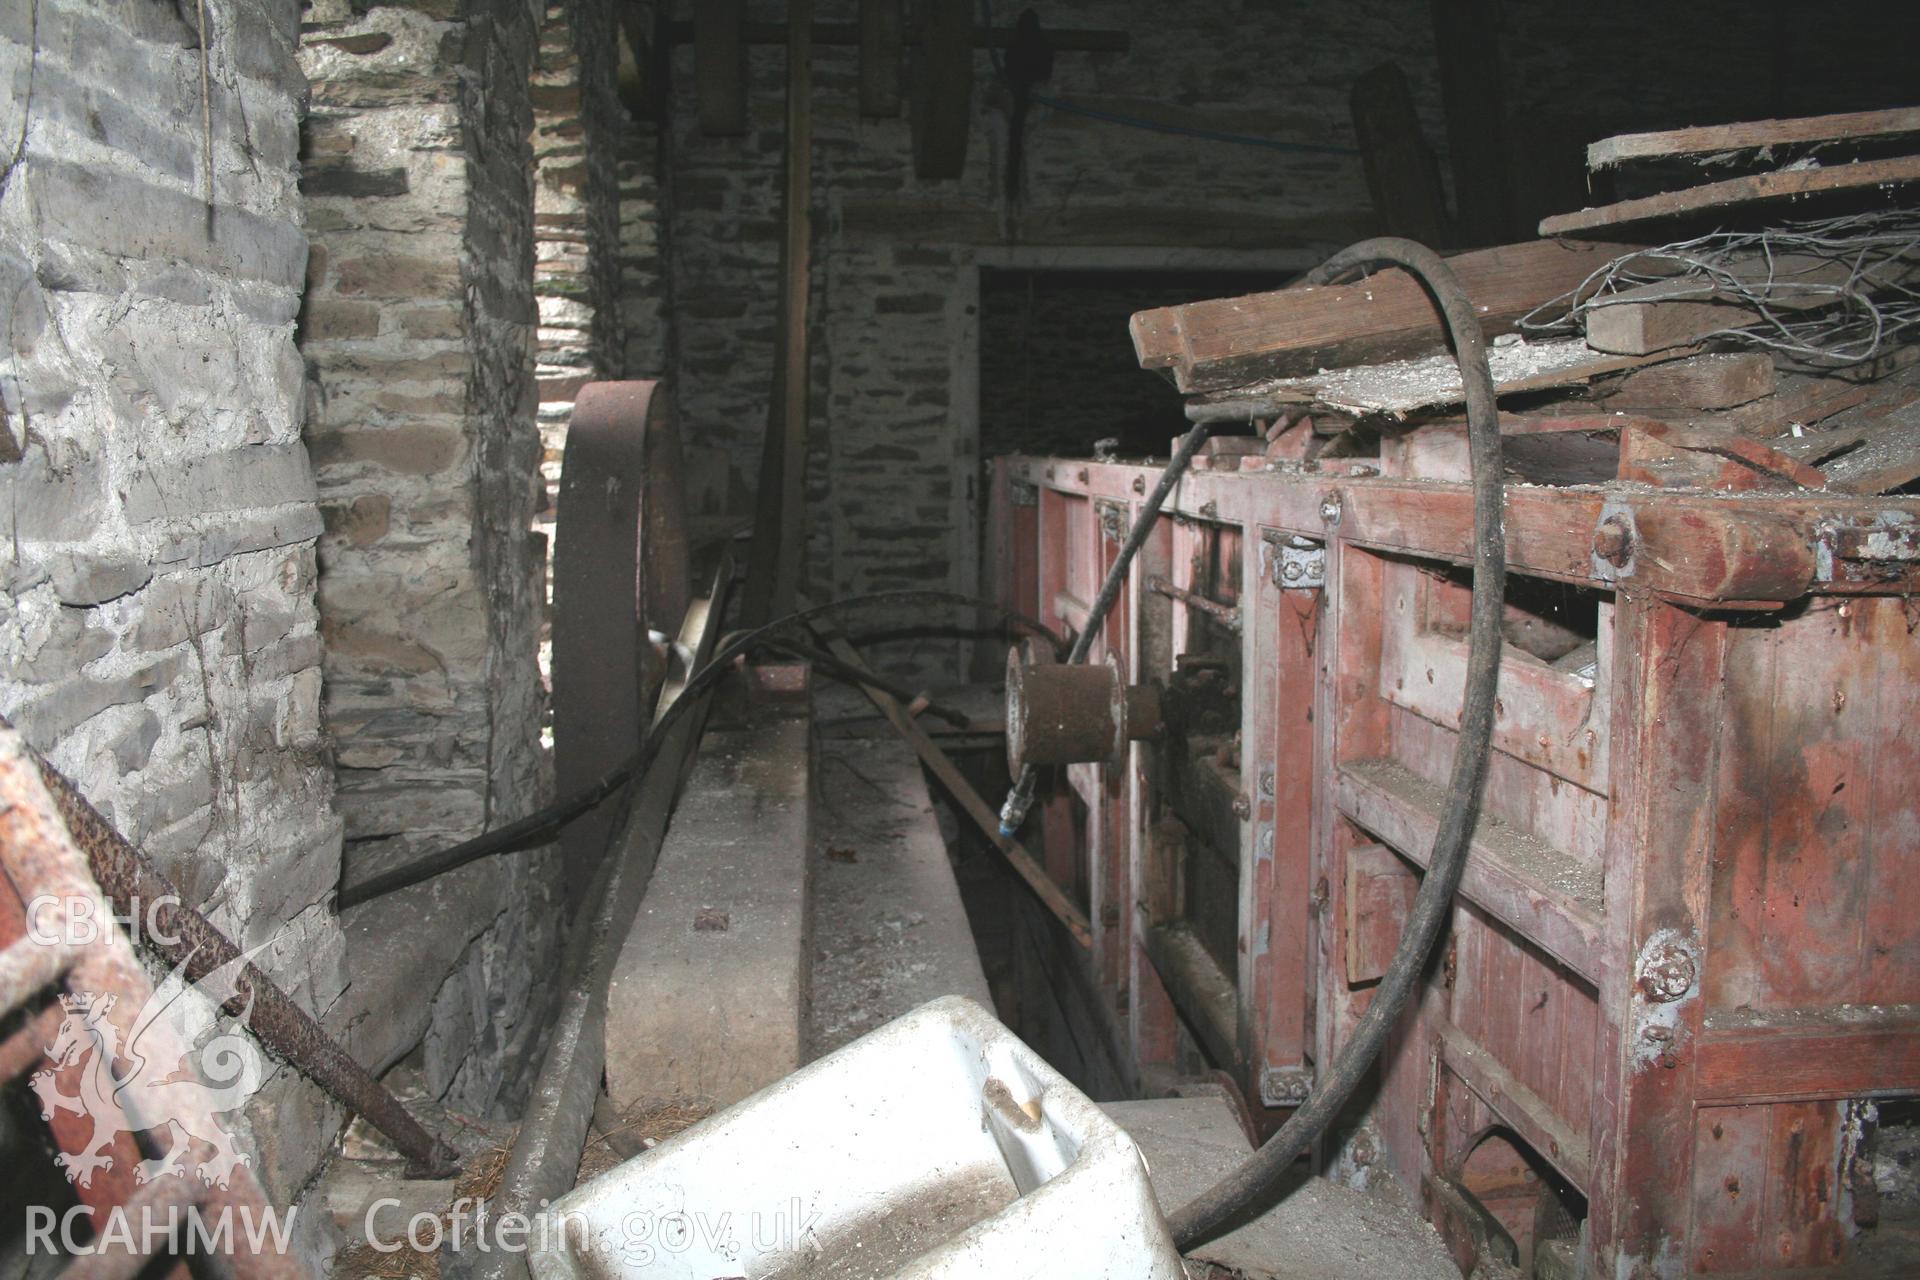 Interior view of threshing house showing threshing machine. Photographic survey of the threshing machine in the threshing house at Tan-y-Graig Farm, Llanfarian. Conducted by Geoff Ward and John Wiles 11th December 2016.